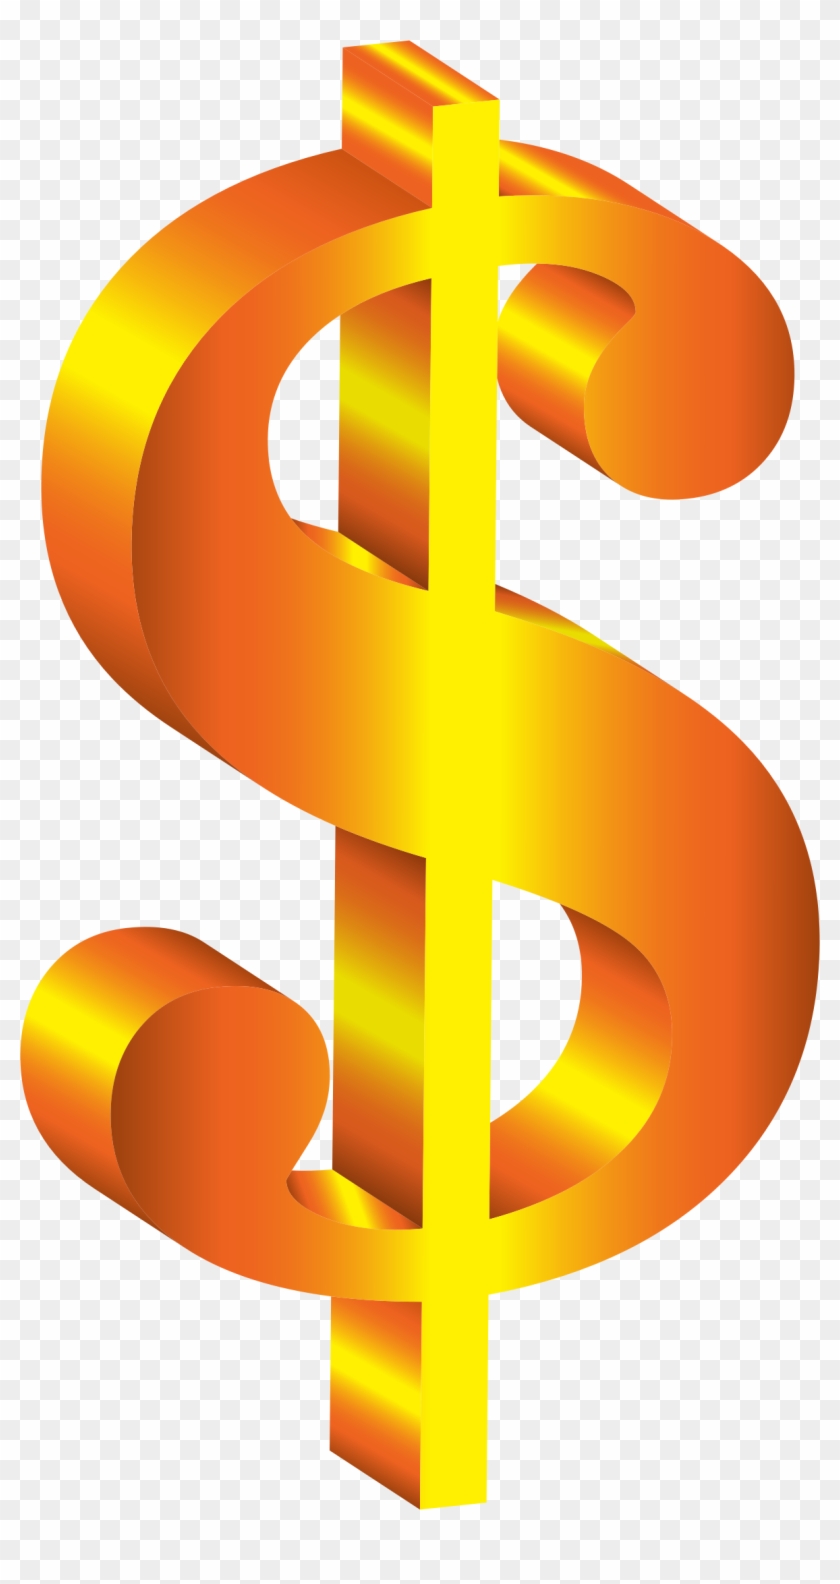 Image - Dollar Sign Png #350886